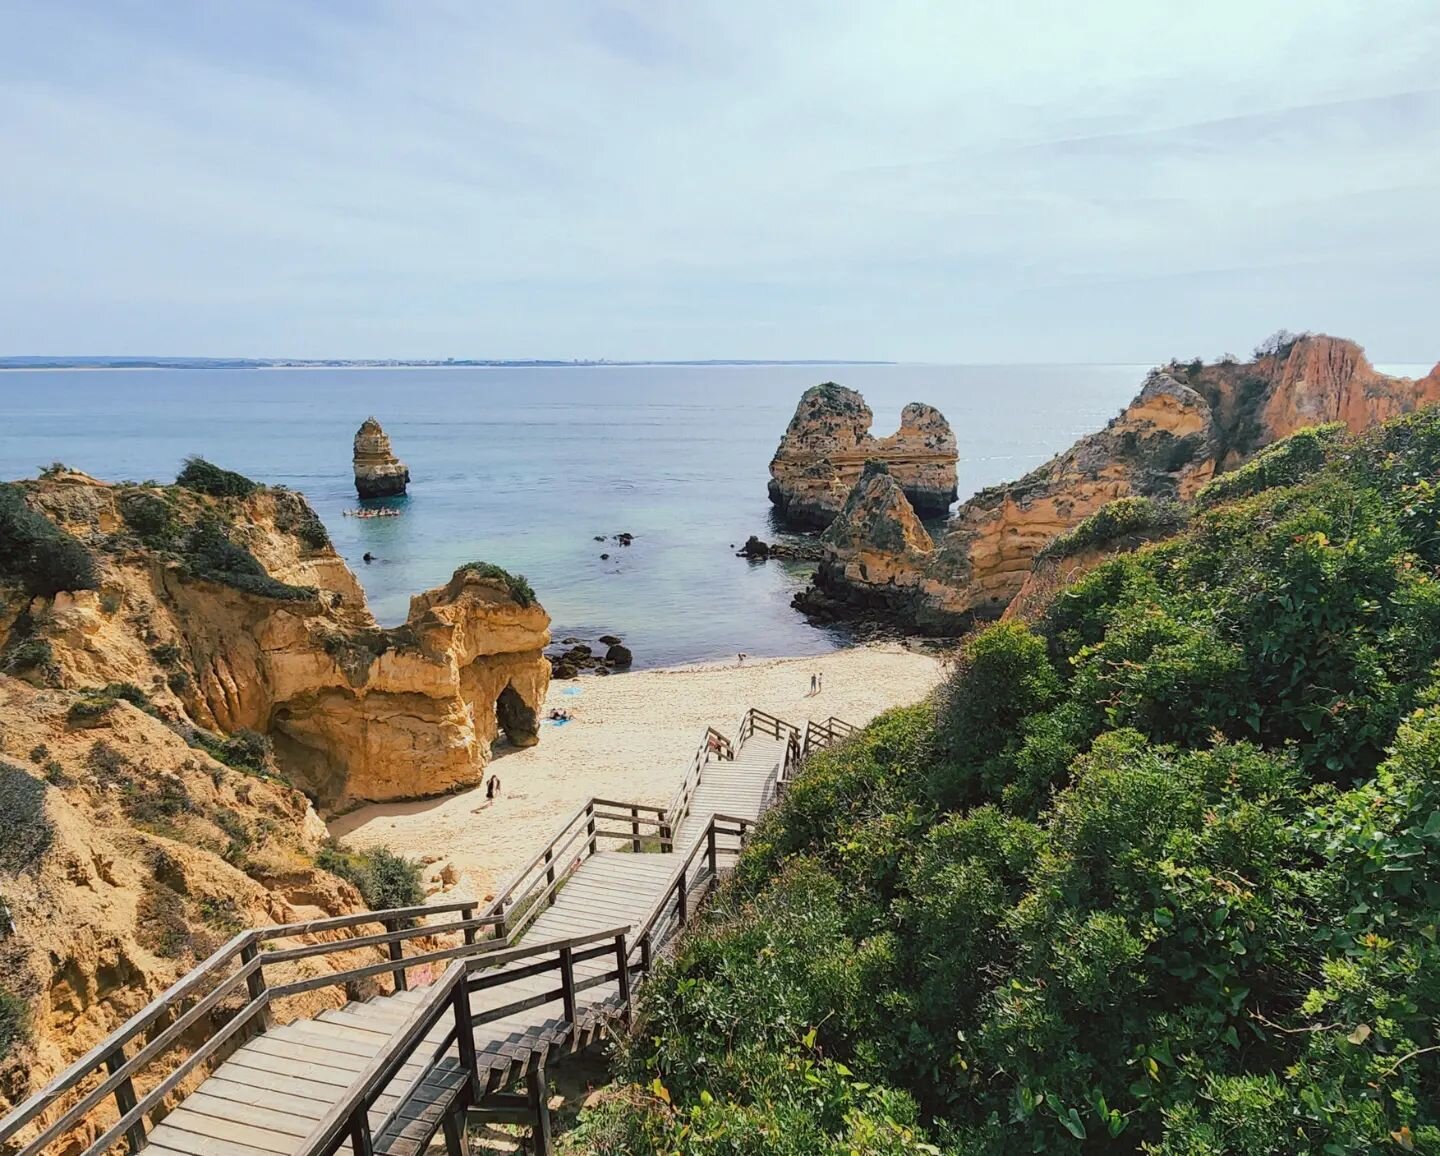 New blog post features my first ever solo travel location and some of the most beautiful beaches in Portugal ☀️ ⁠
⁠
Link in bio ✌️⁠
⁠
#portugal #portugalblog #lagosportugal #travelblog #travelblogger #travel #travelmore #wanderlust #traveltips #goexp